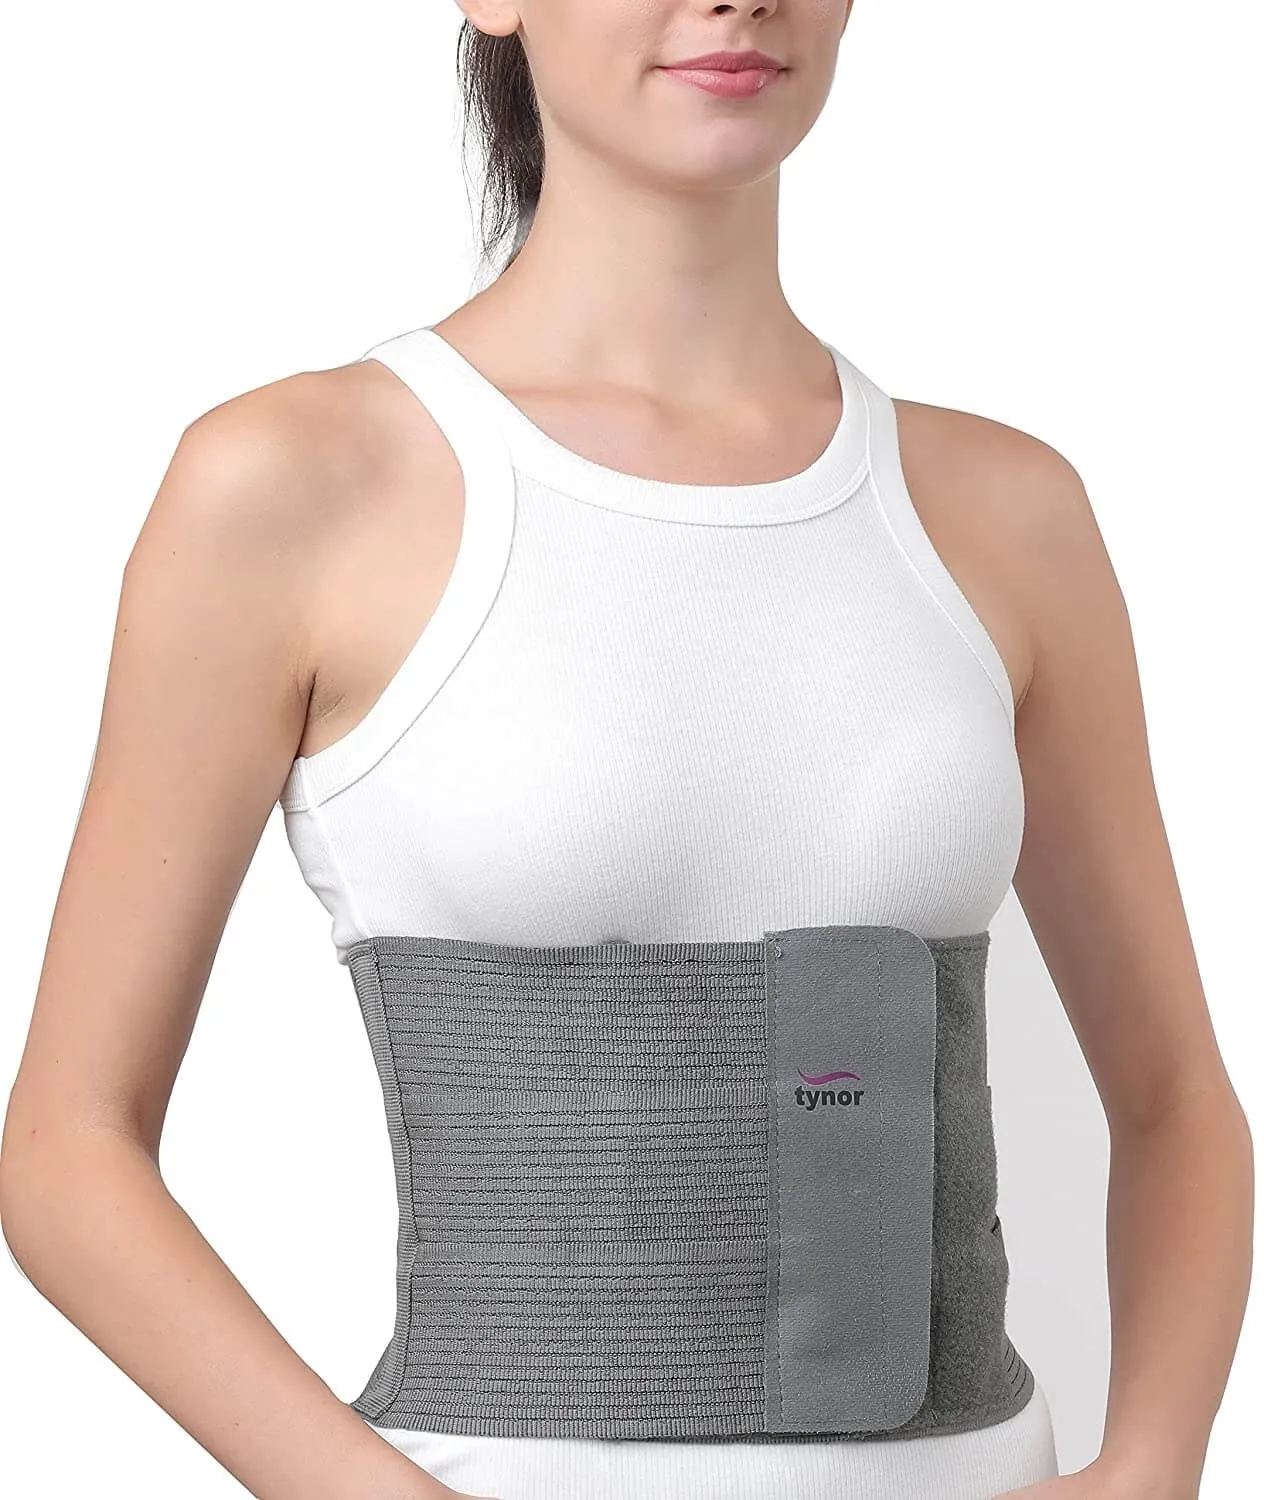 Supportive Abdominal Binder 8 Inch for Comfort and Compression – Dr. Odin